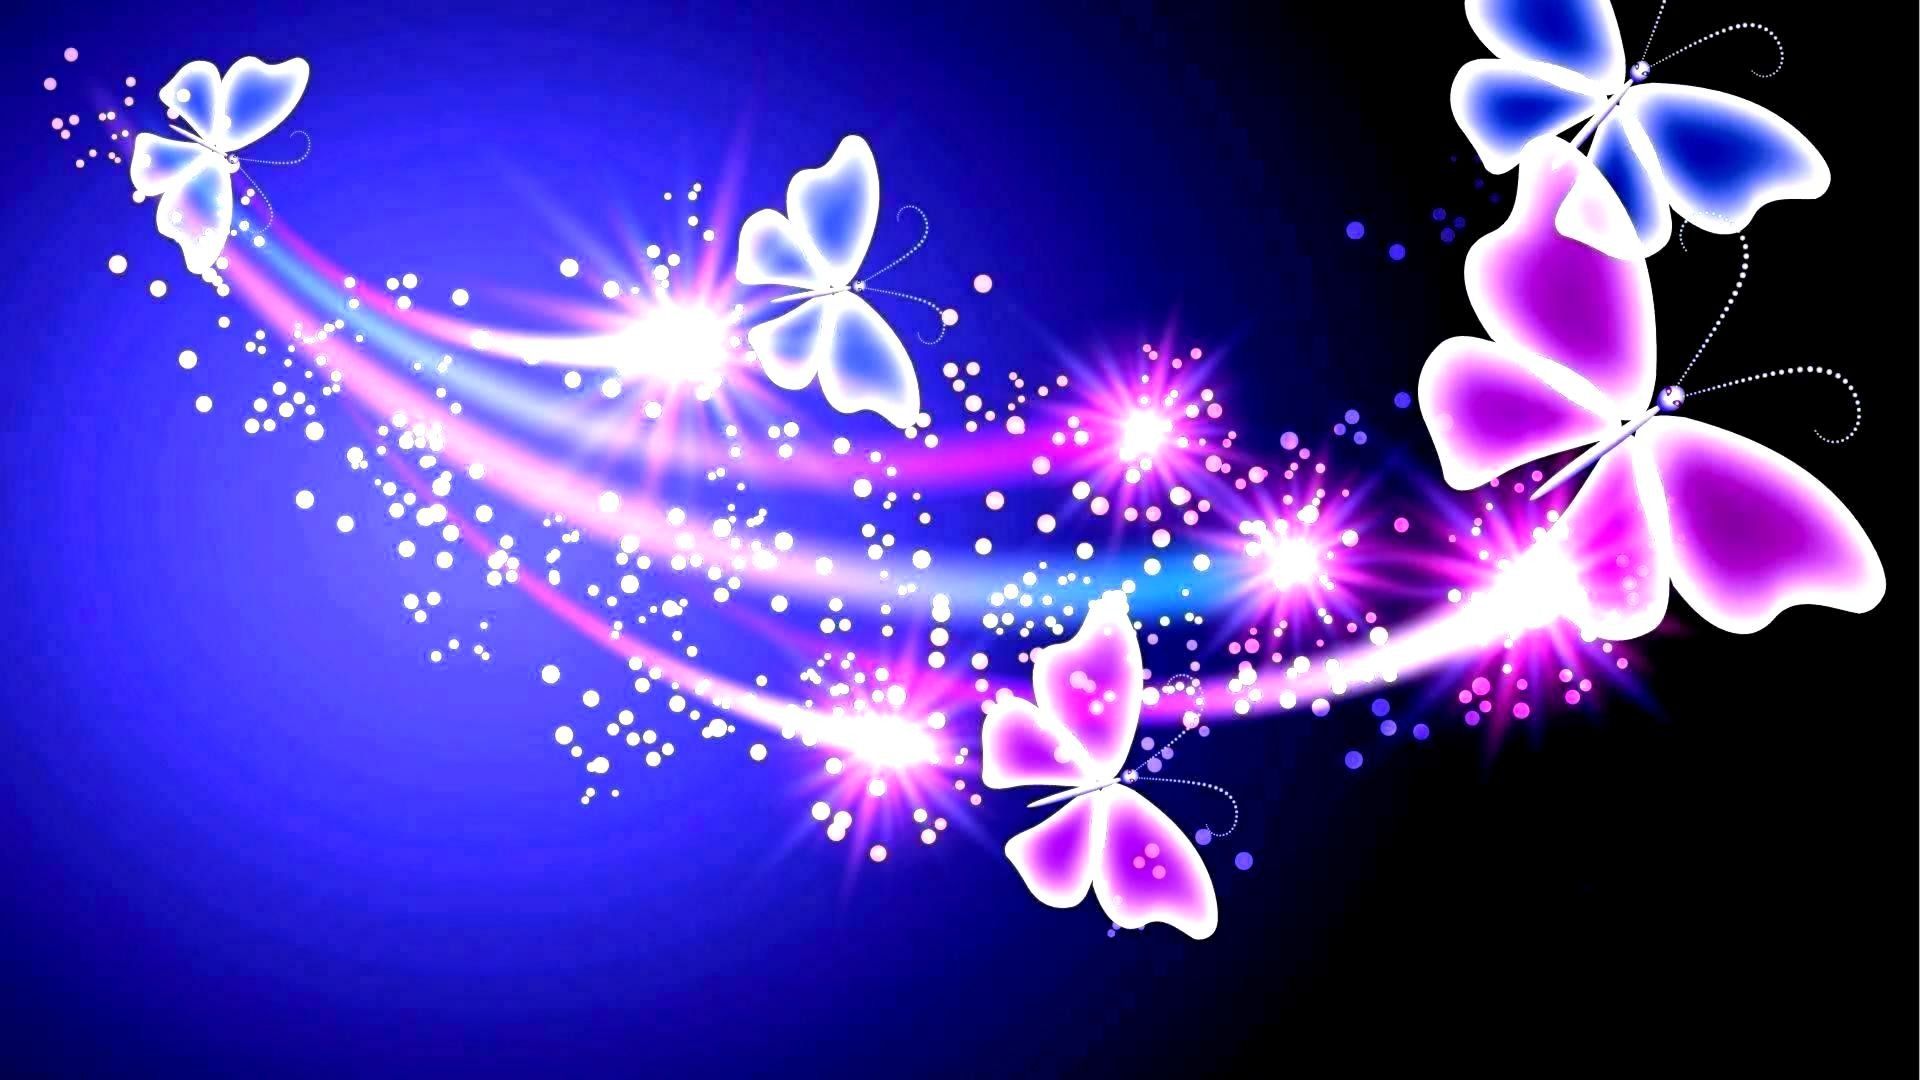 Neon Rainbow Abstract HD Wallpaper Butterflies And Black